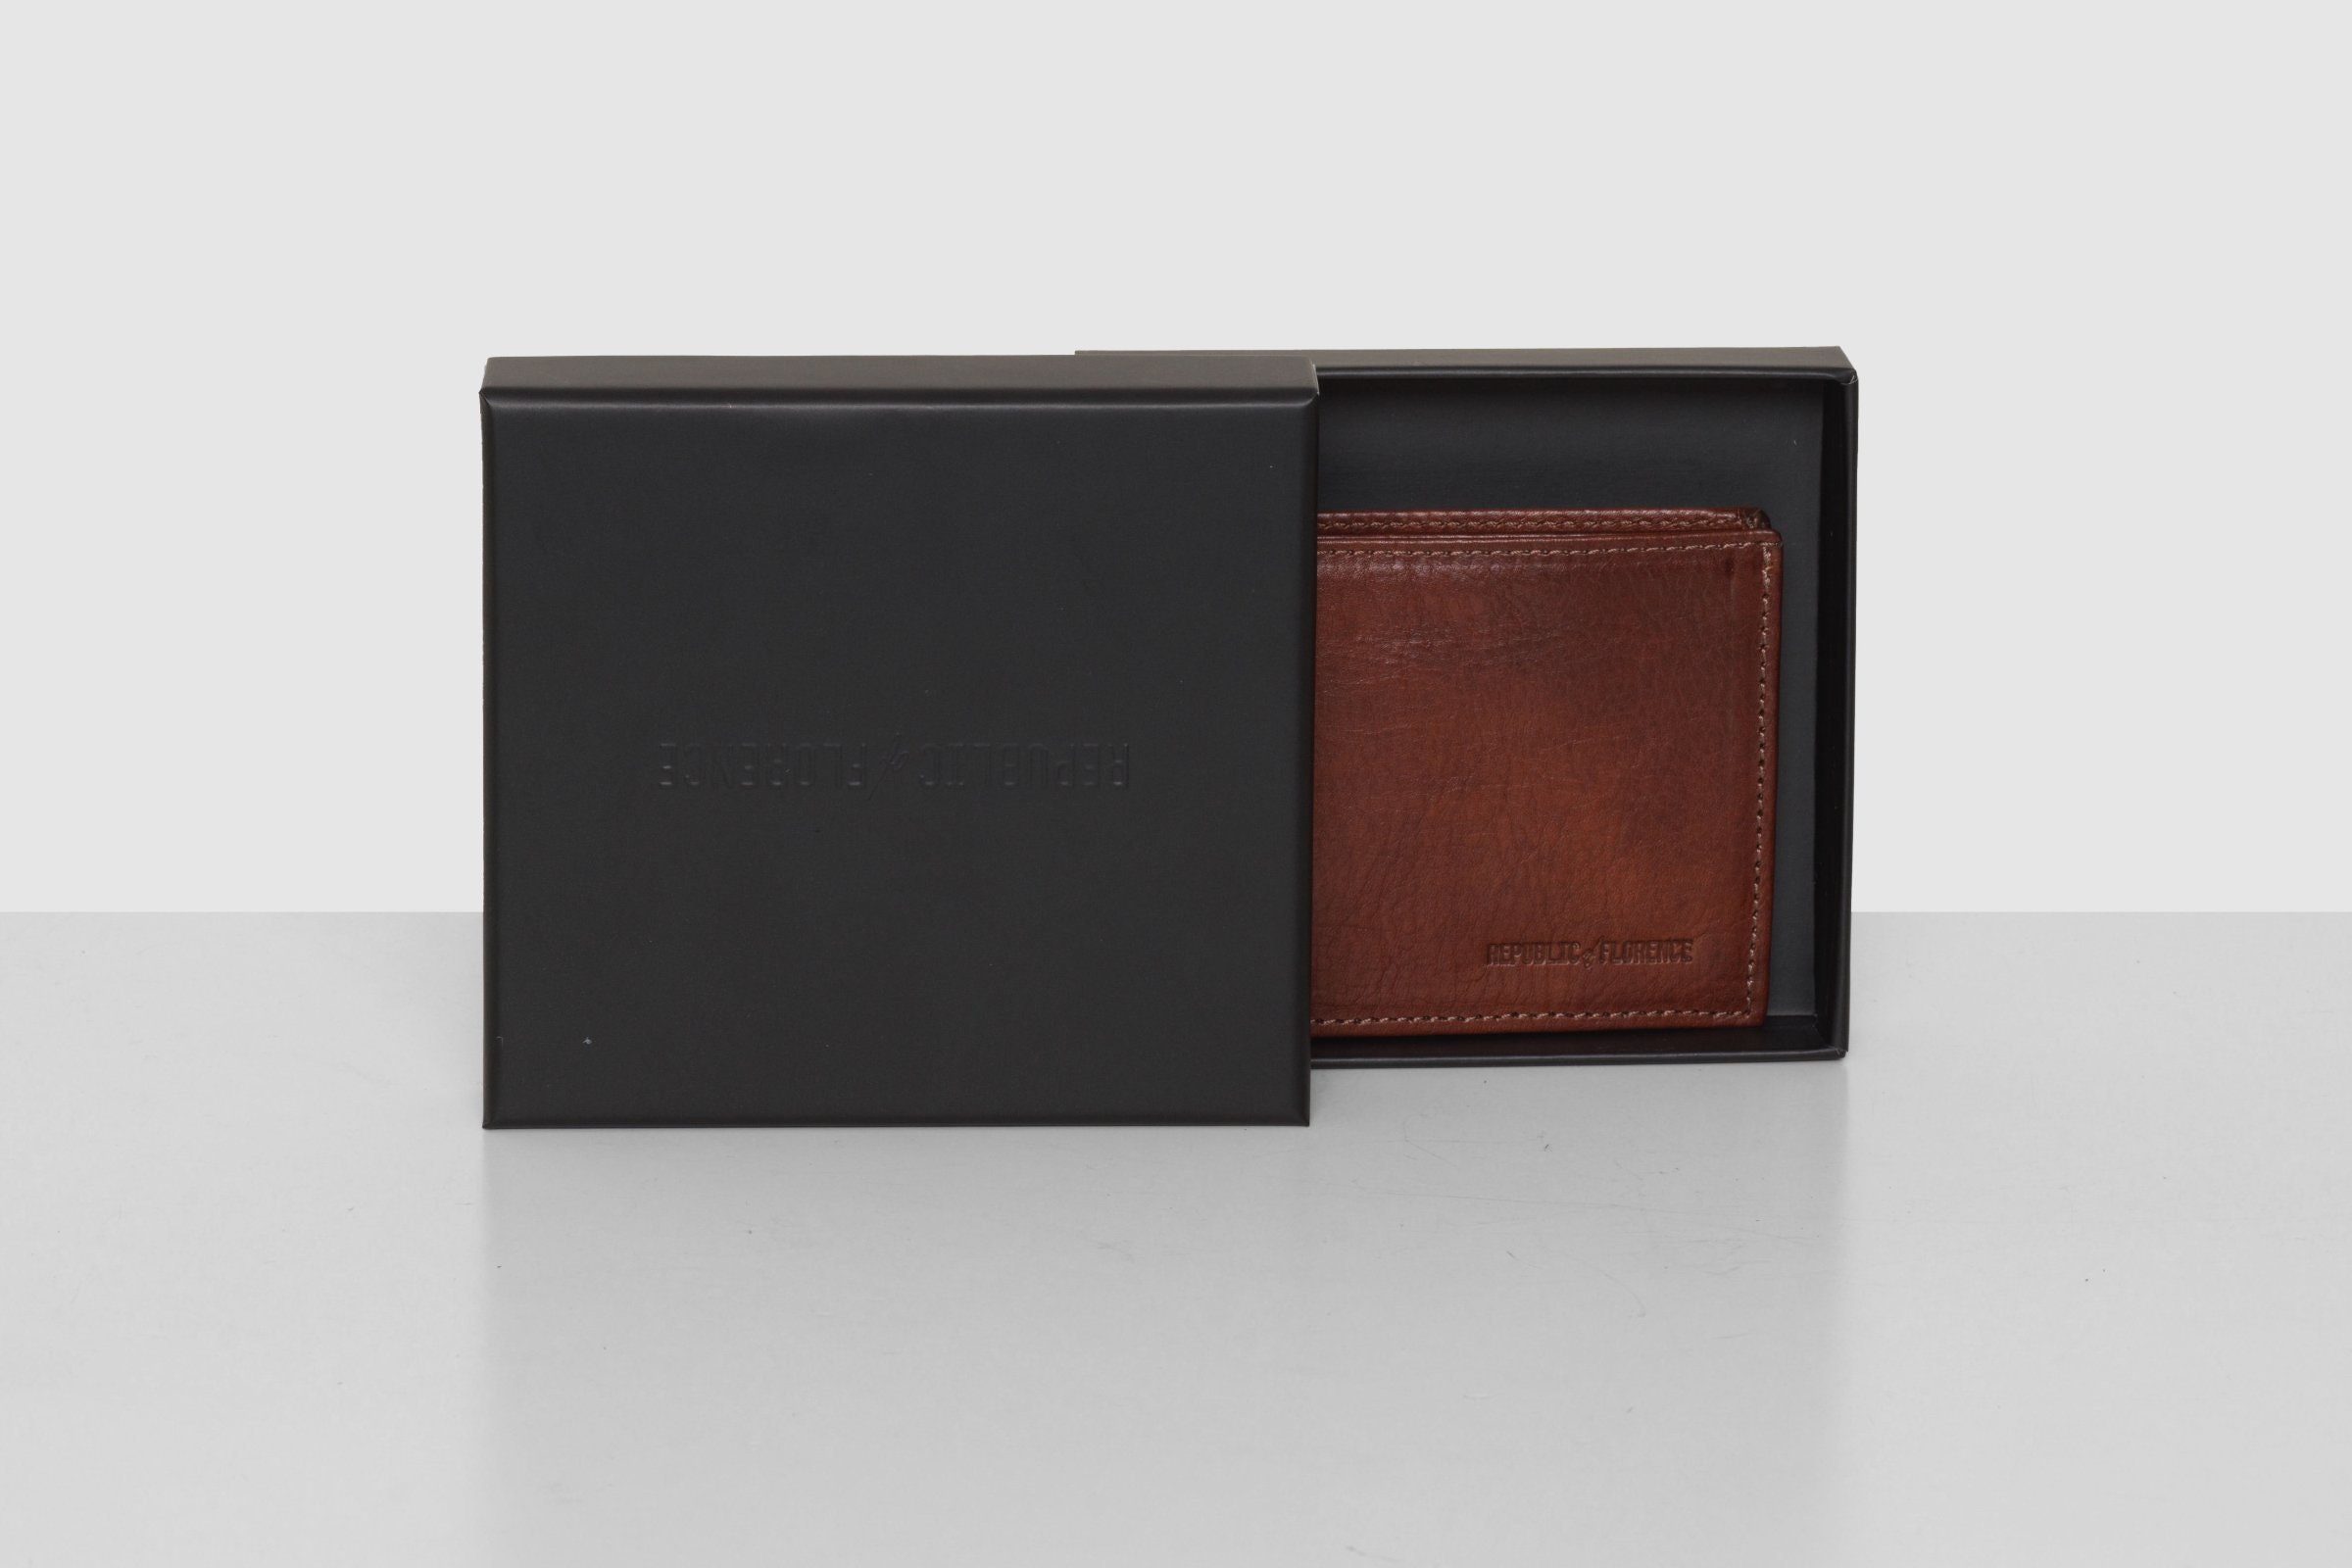 Rossini Brown Trifold Wallet - but,since